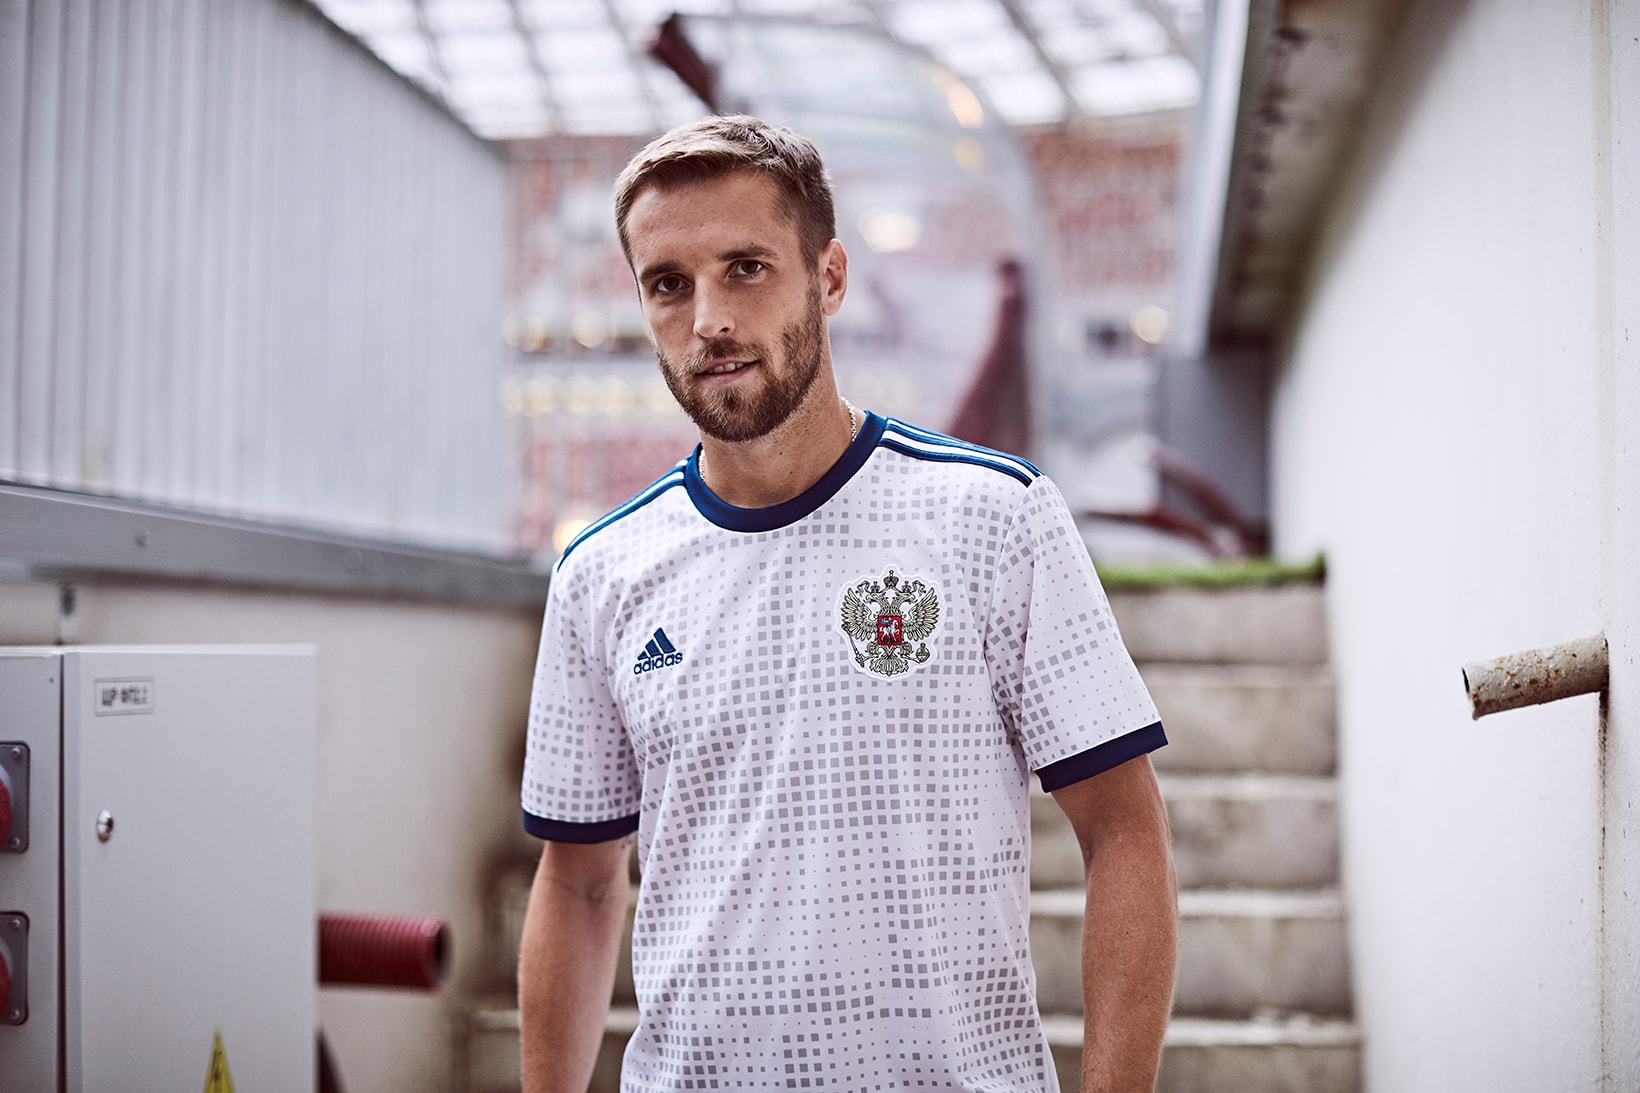 adidas 2018 World Cup FIFA Away Kits Football Soccer Jerseys Uniforms Germany Mesut Ozil Lionel Messi James Rodriguez Spain Argentina Colombia Belgium Russia Japan Mexico